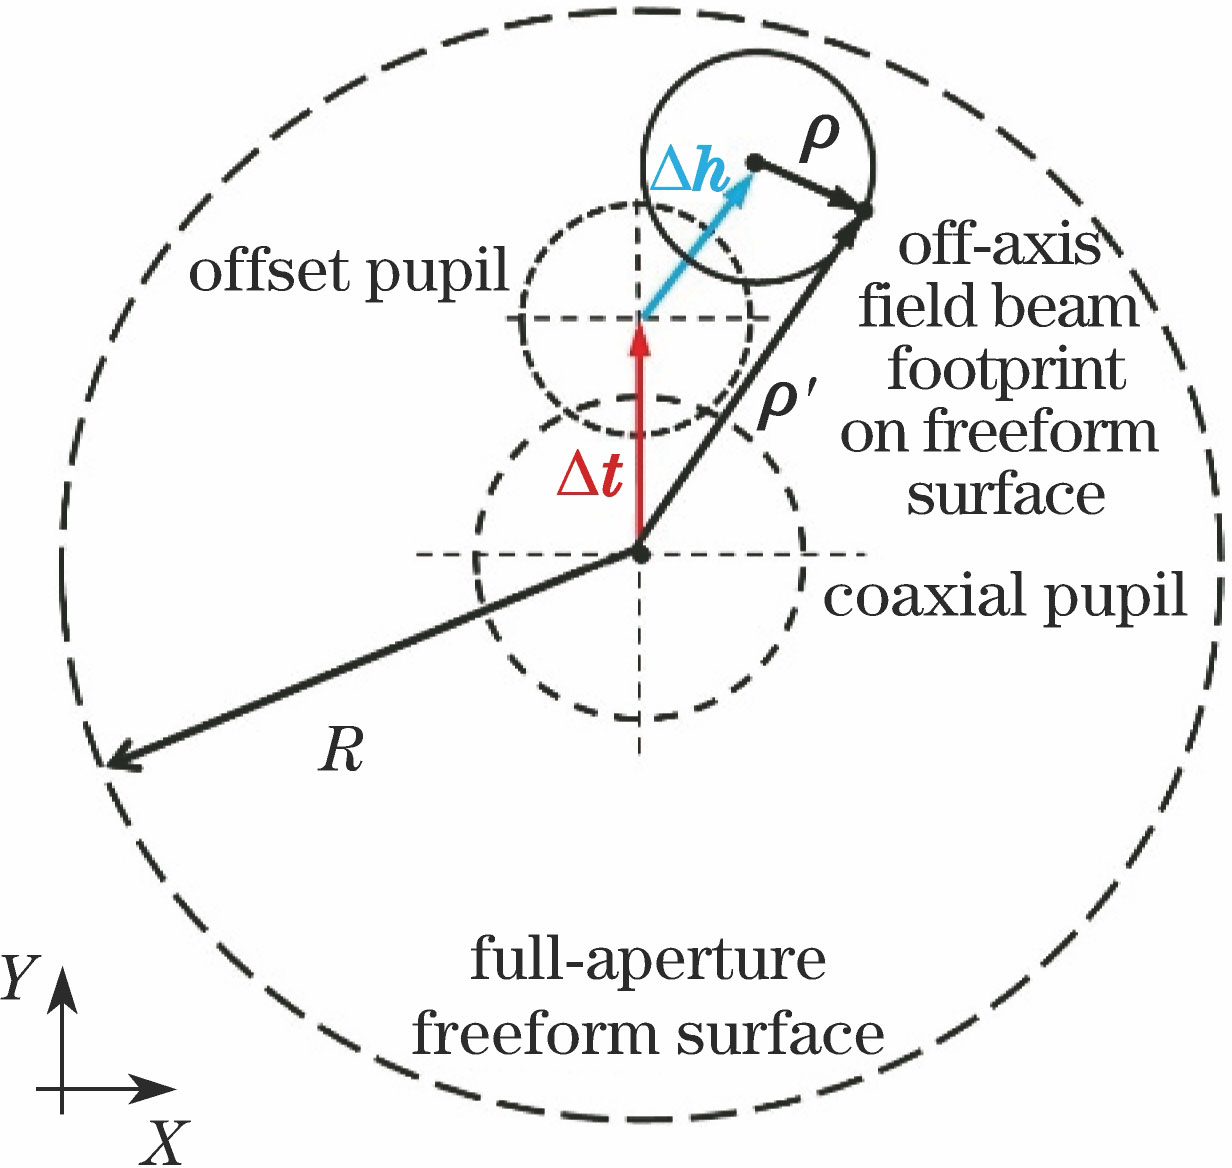 Equivalent aperture offset vector in the pupil off-axis freeform system